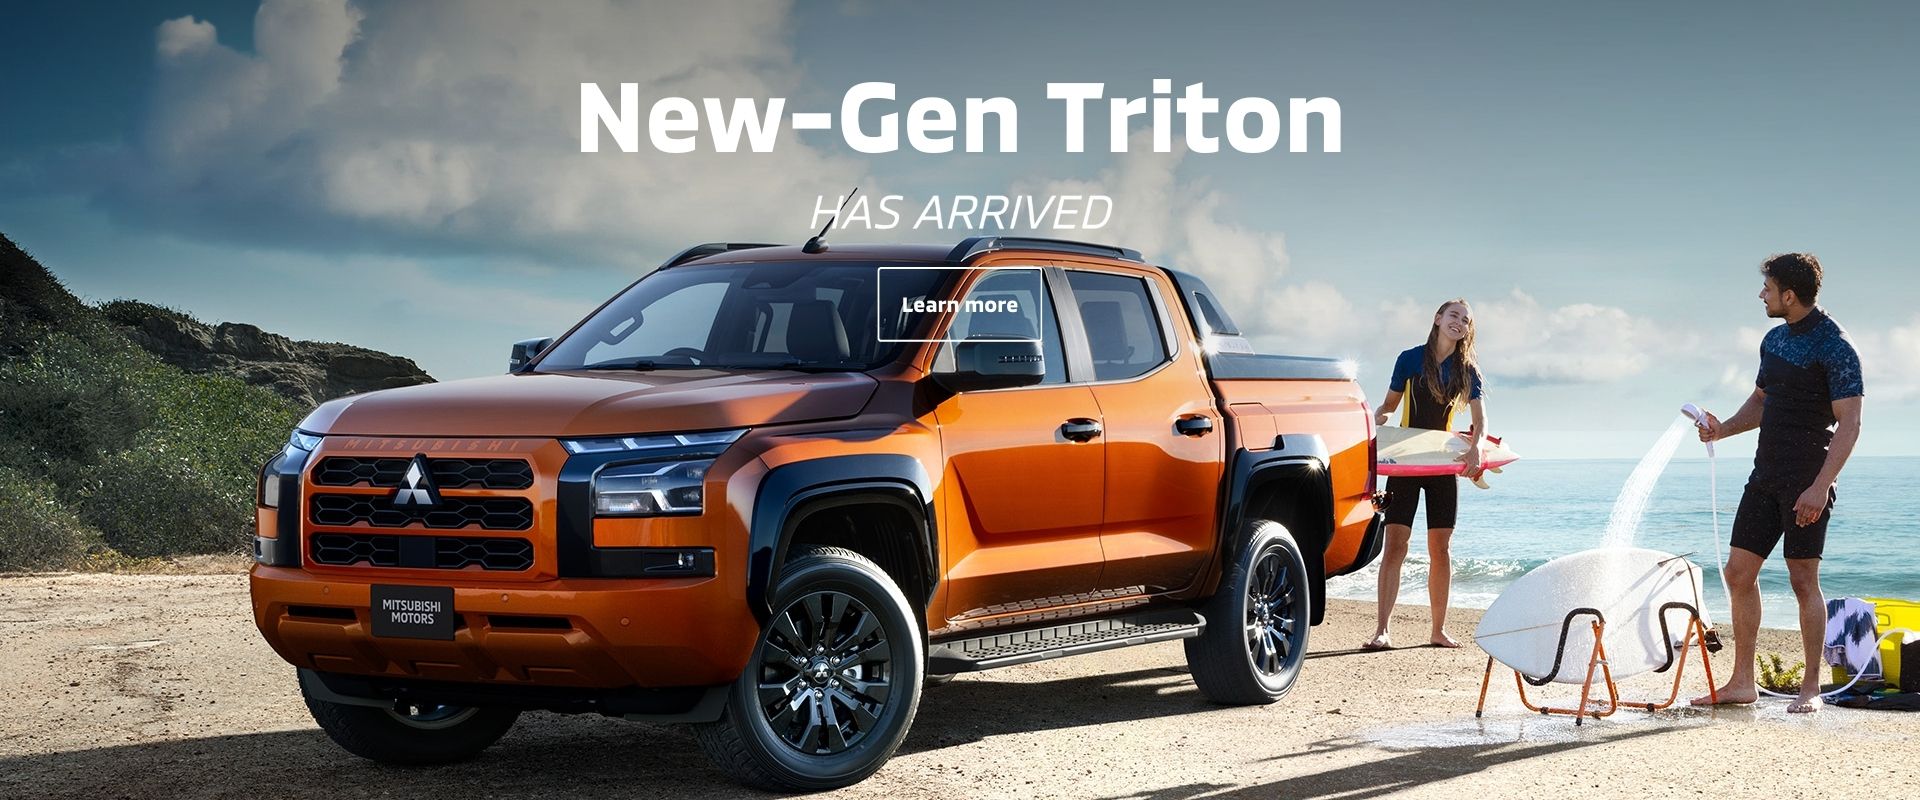 New-Gen Triton HAS ARRIVED